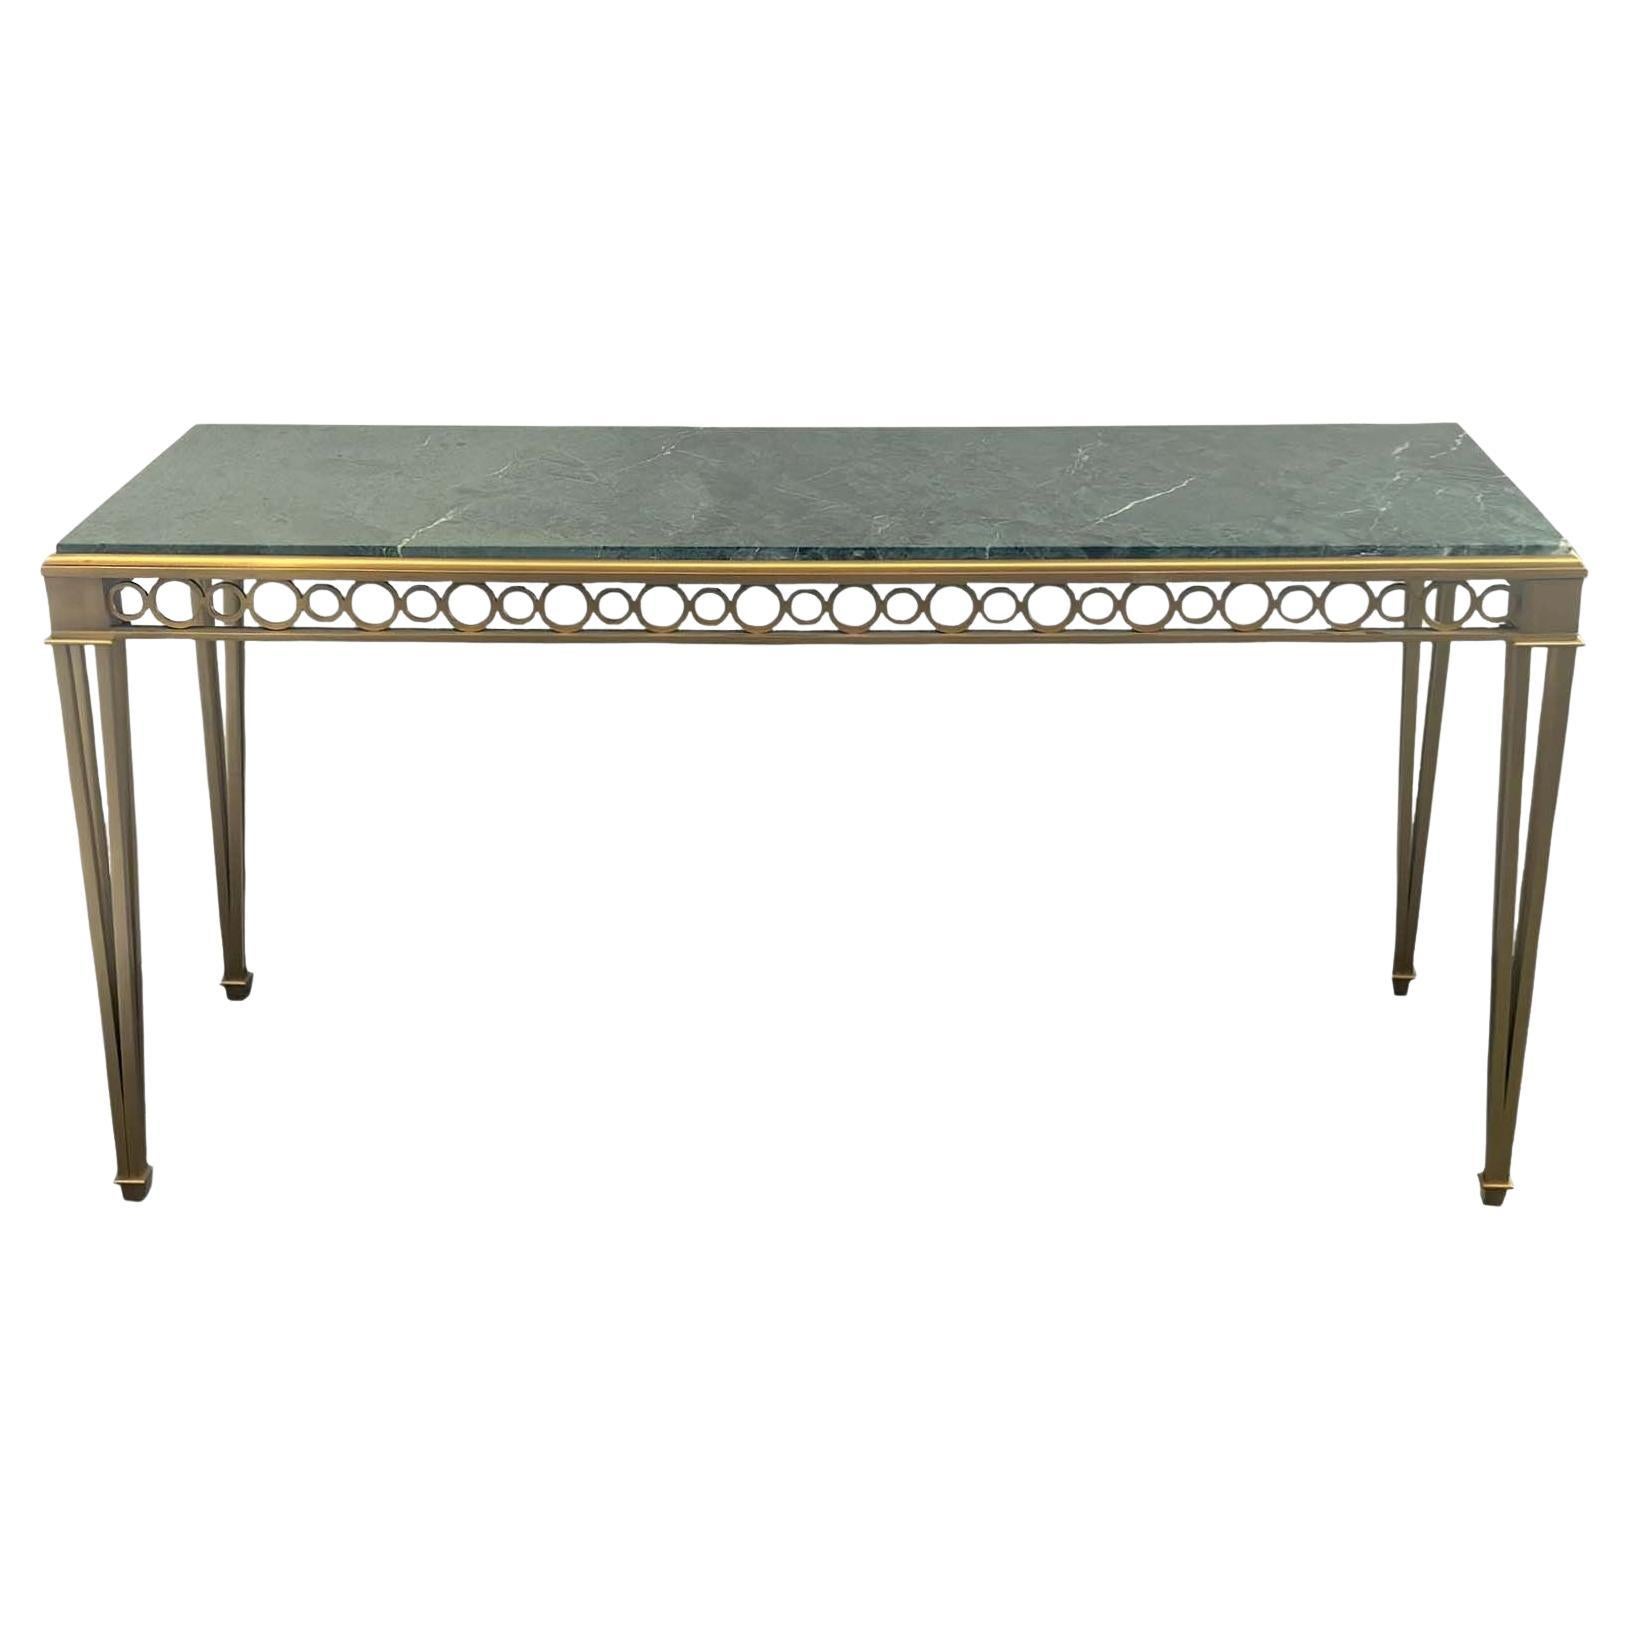 Paul M. Jones Bronze & Marble Neoclassical-Style Console Table For Sale